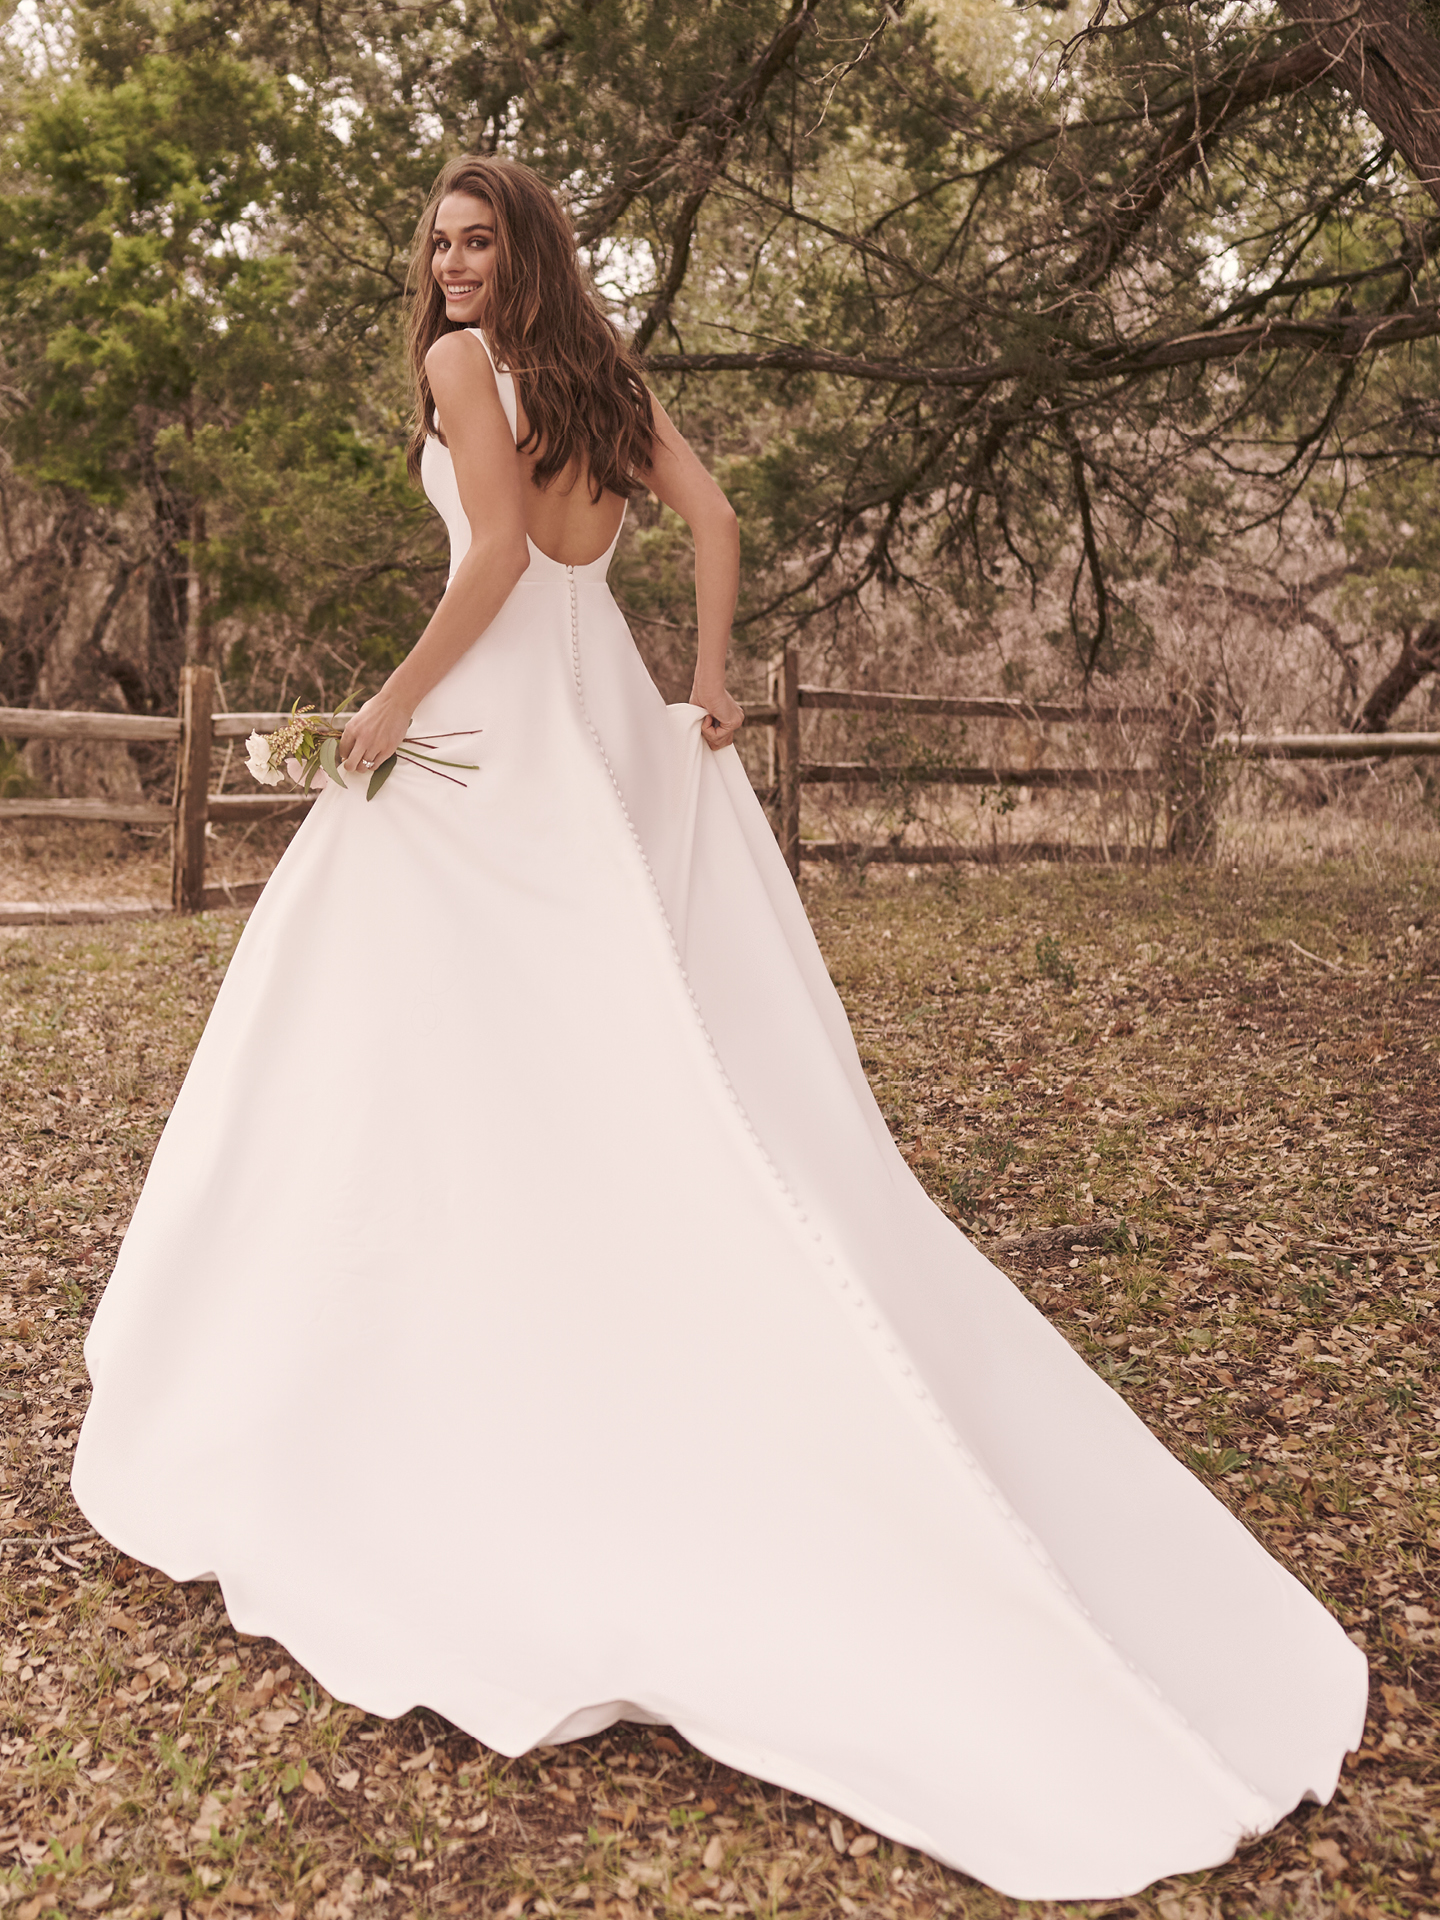 Bride Wearing Simple A-Line Wedding Dress Called Paxton By Maggie Sottero